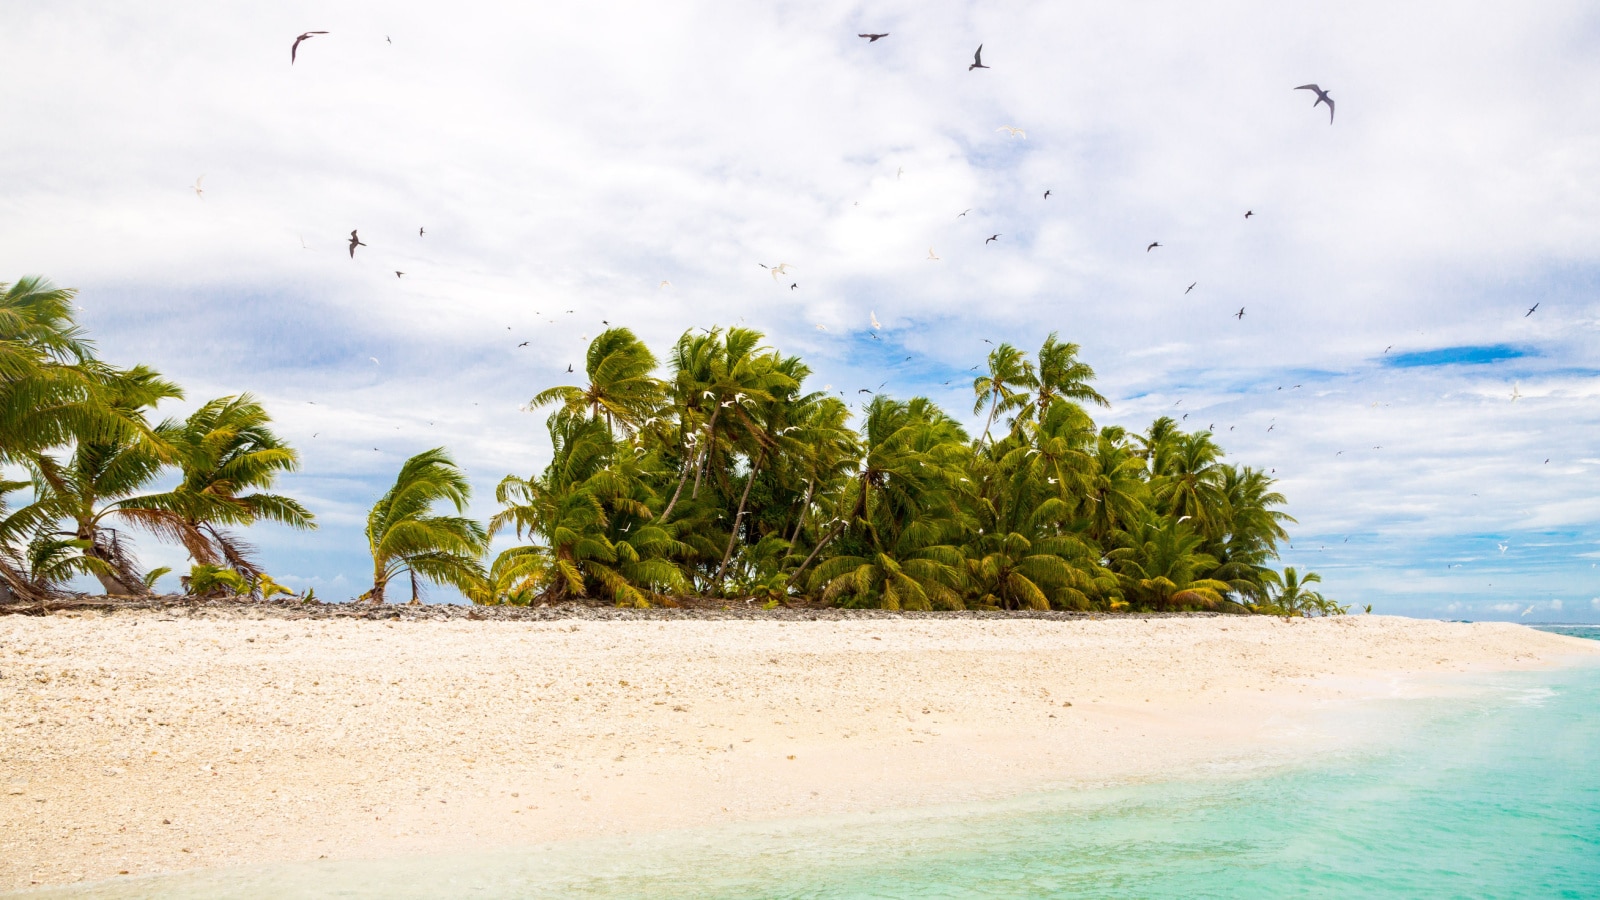 Small remote tropical island (motu) overgrown with palms in azure turquoise blue lagoon. Yellow sandy beach, flock of birds flying above. Funafuti atoll Conservation Area, Tuvalu, Polynesia, Oceania